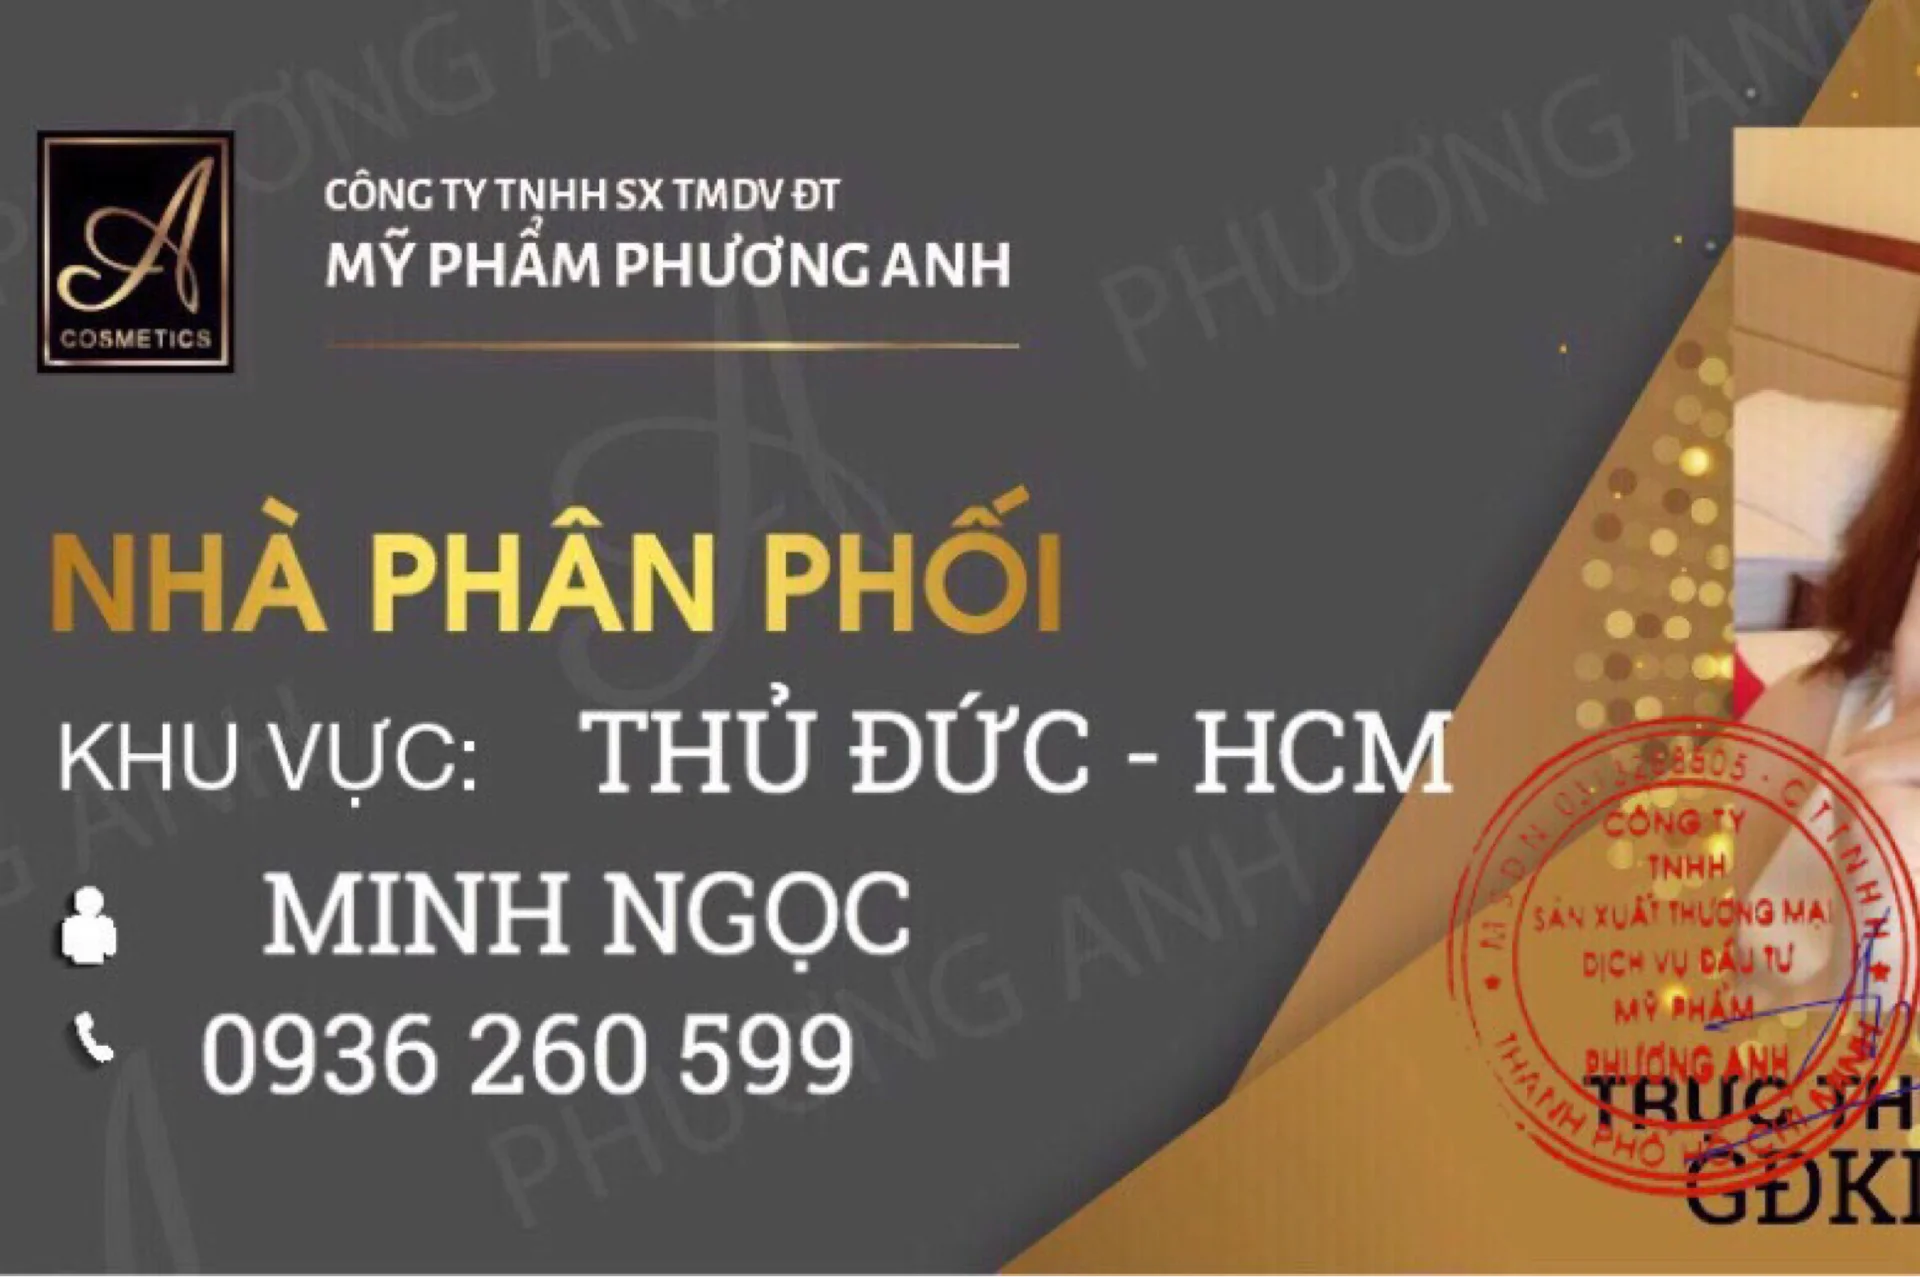 Minh Ngọc's cover photo